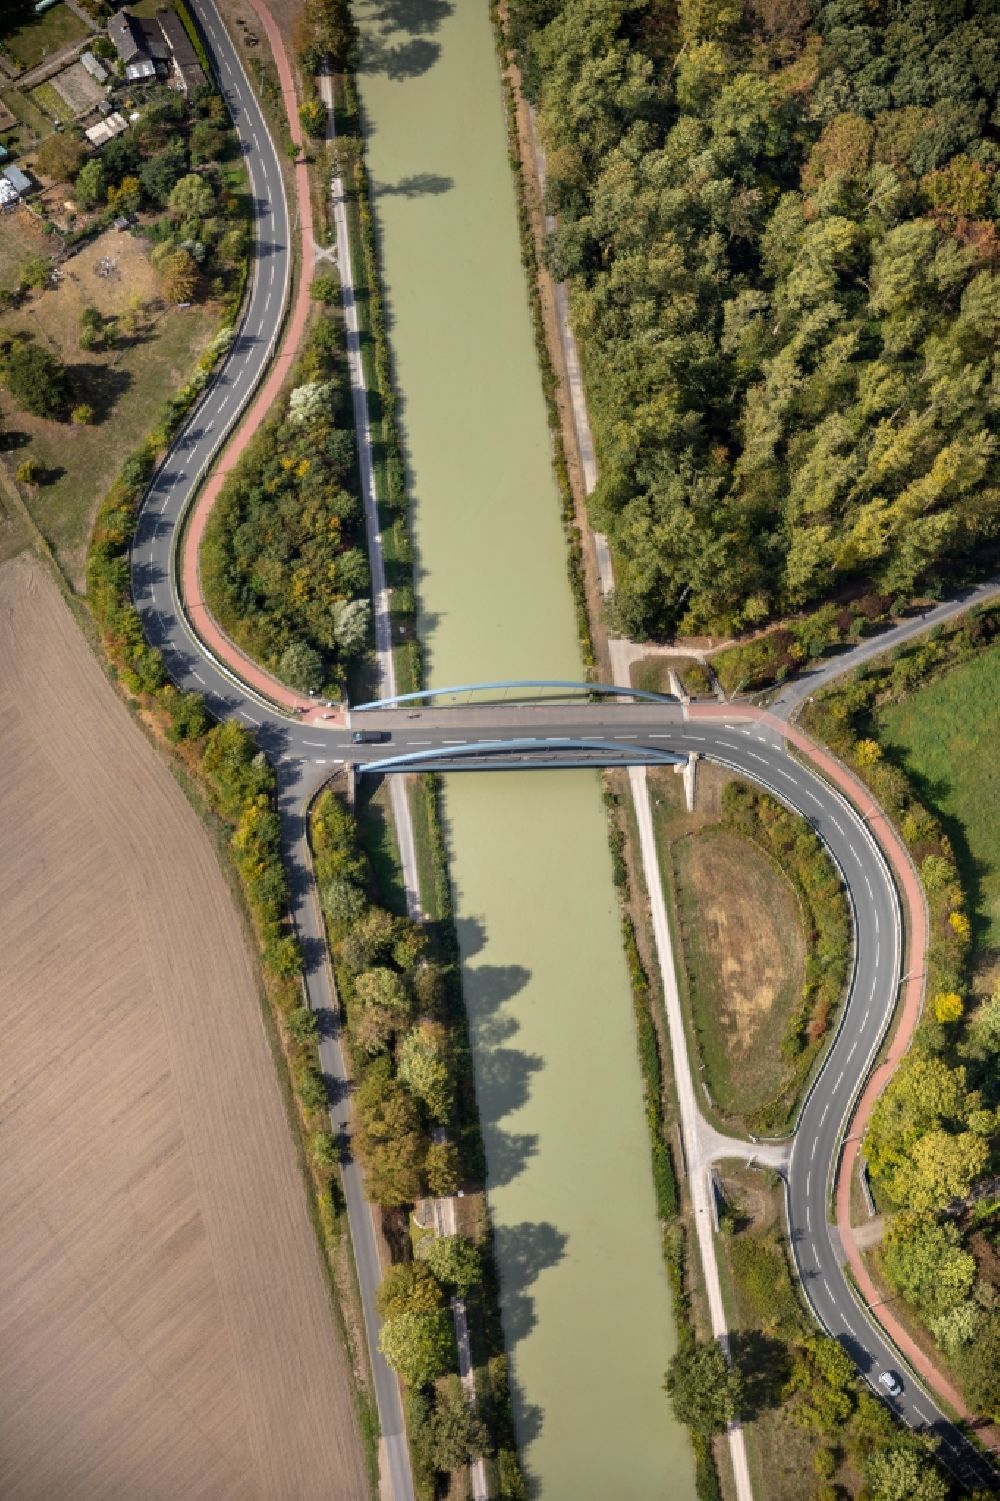 Hamm from the bird's eye view: Serpentine-shaped curve of a road guide Alter Uentroper Weg in Hamm in the state North Rhine-Westphalia, Germany